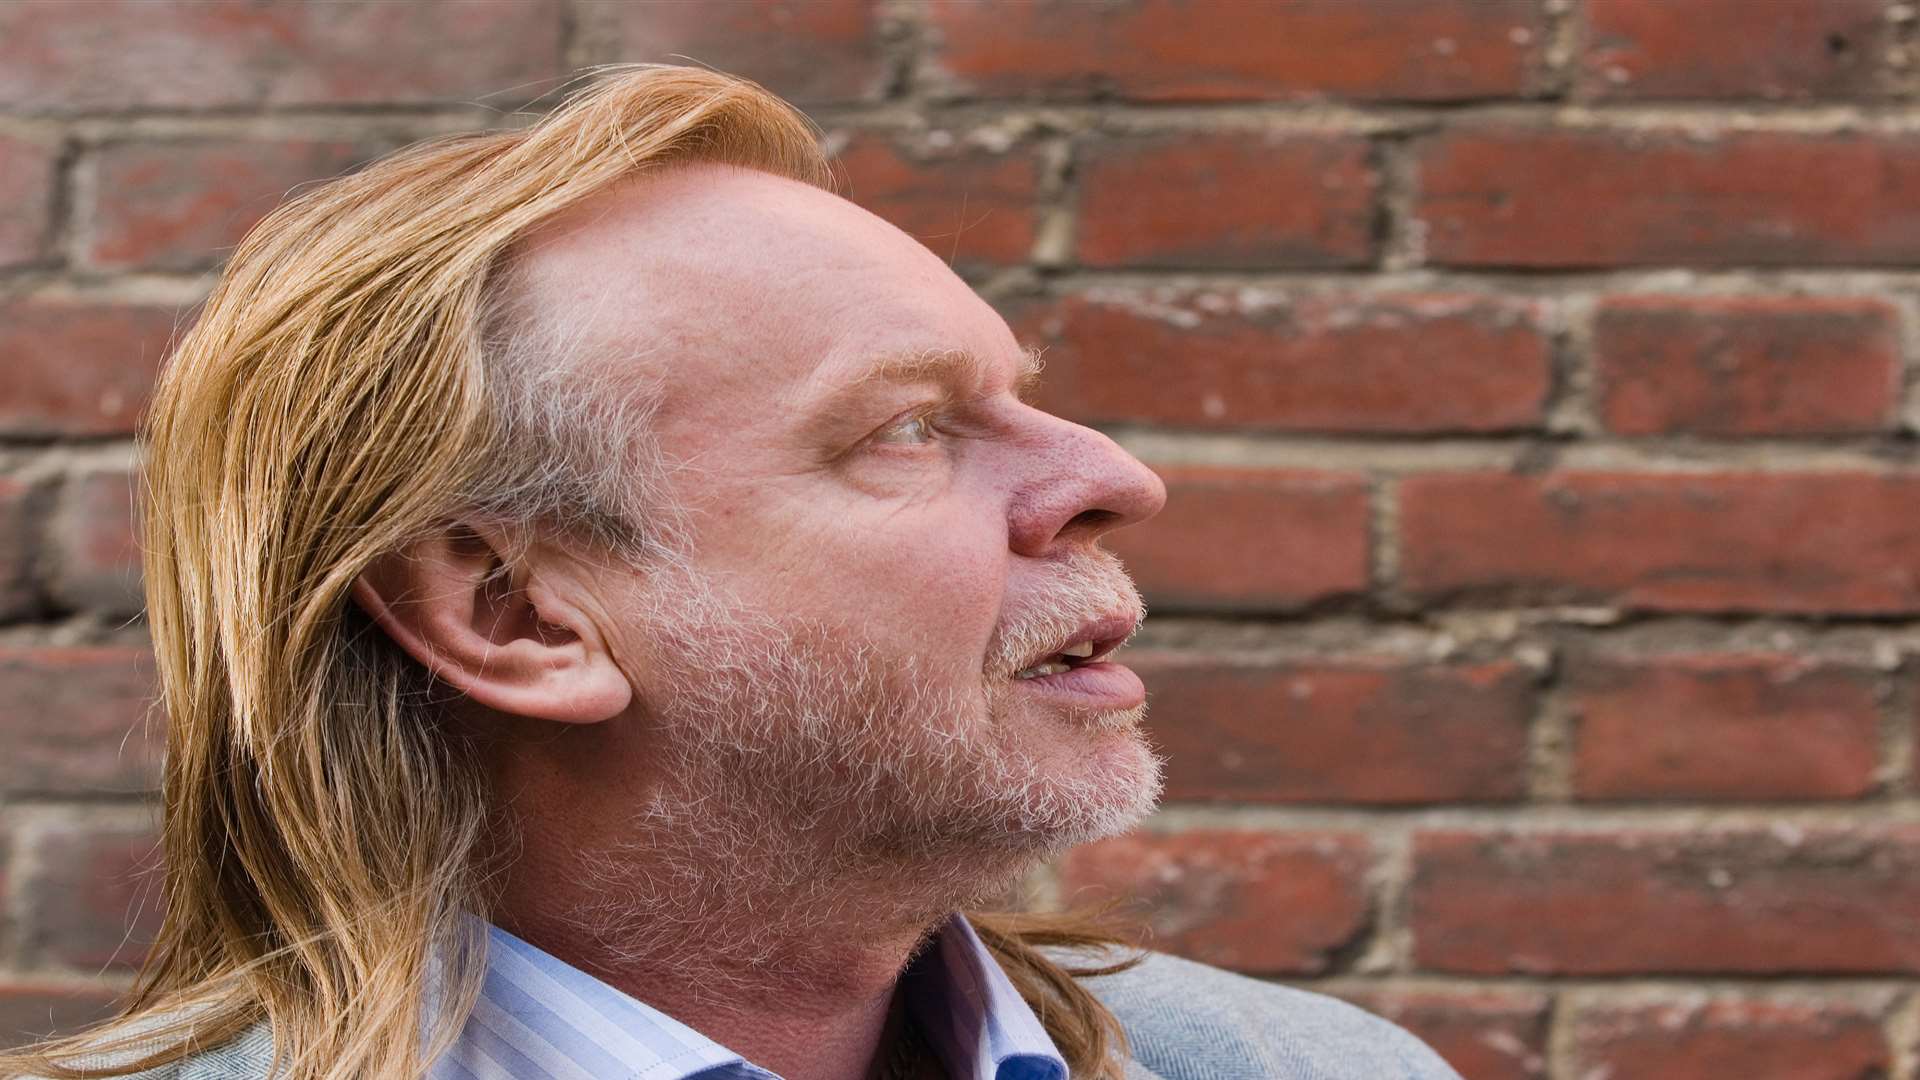 Rick Wakeman will also play in Rye in December